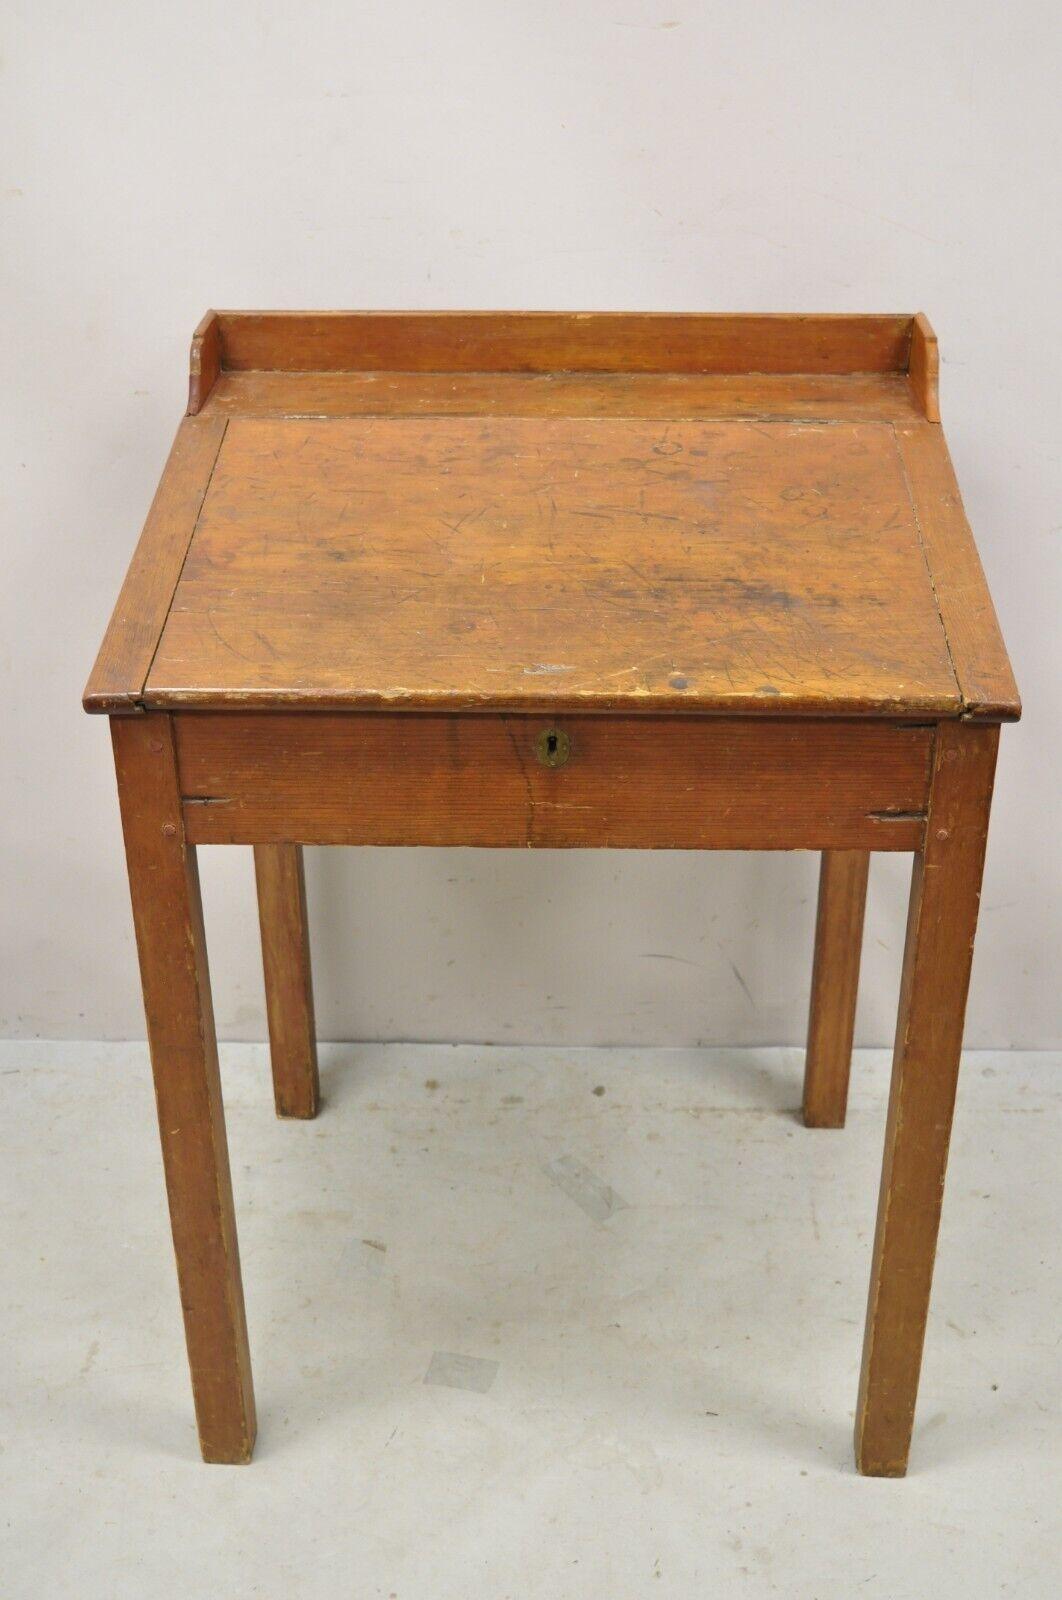 Antique Primitive Colonial Cherry Walnut Tall Schoolmasters Desk Work Stand Table. Item featured Lift top, slanted surface, tall legs, solid wood construction, distressed finish, no key, but unlocked, very nice antique item, quality American